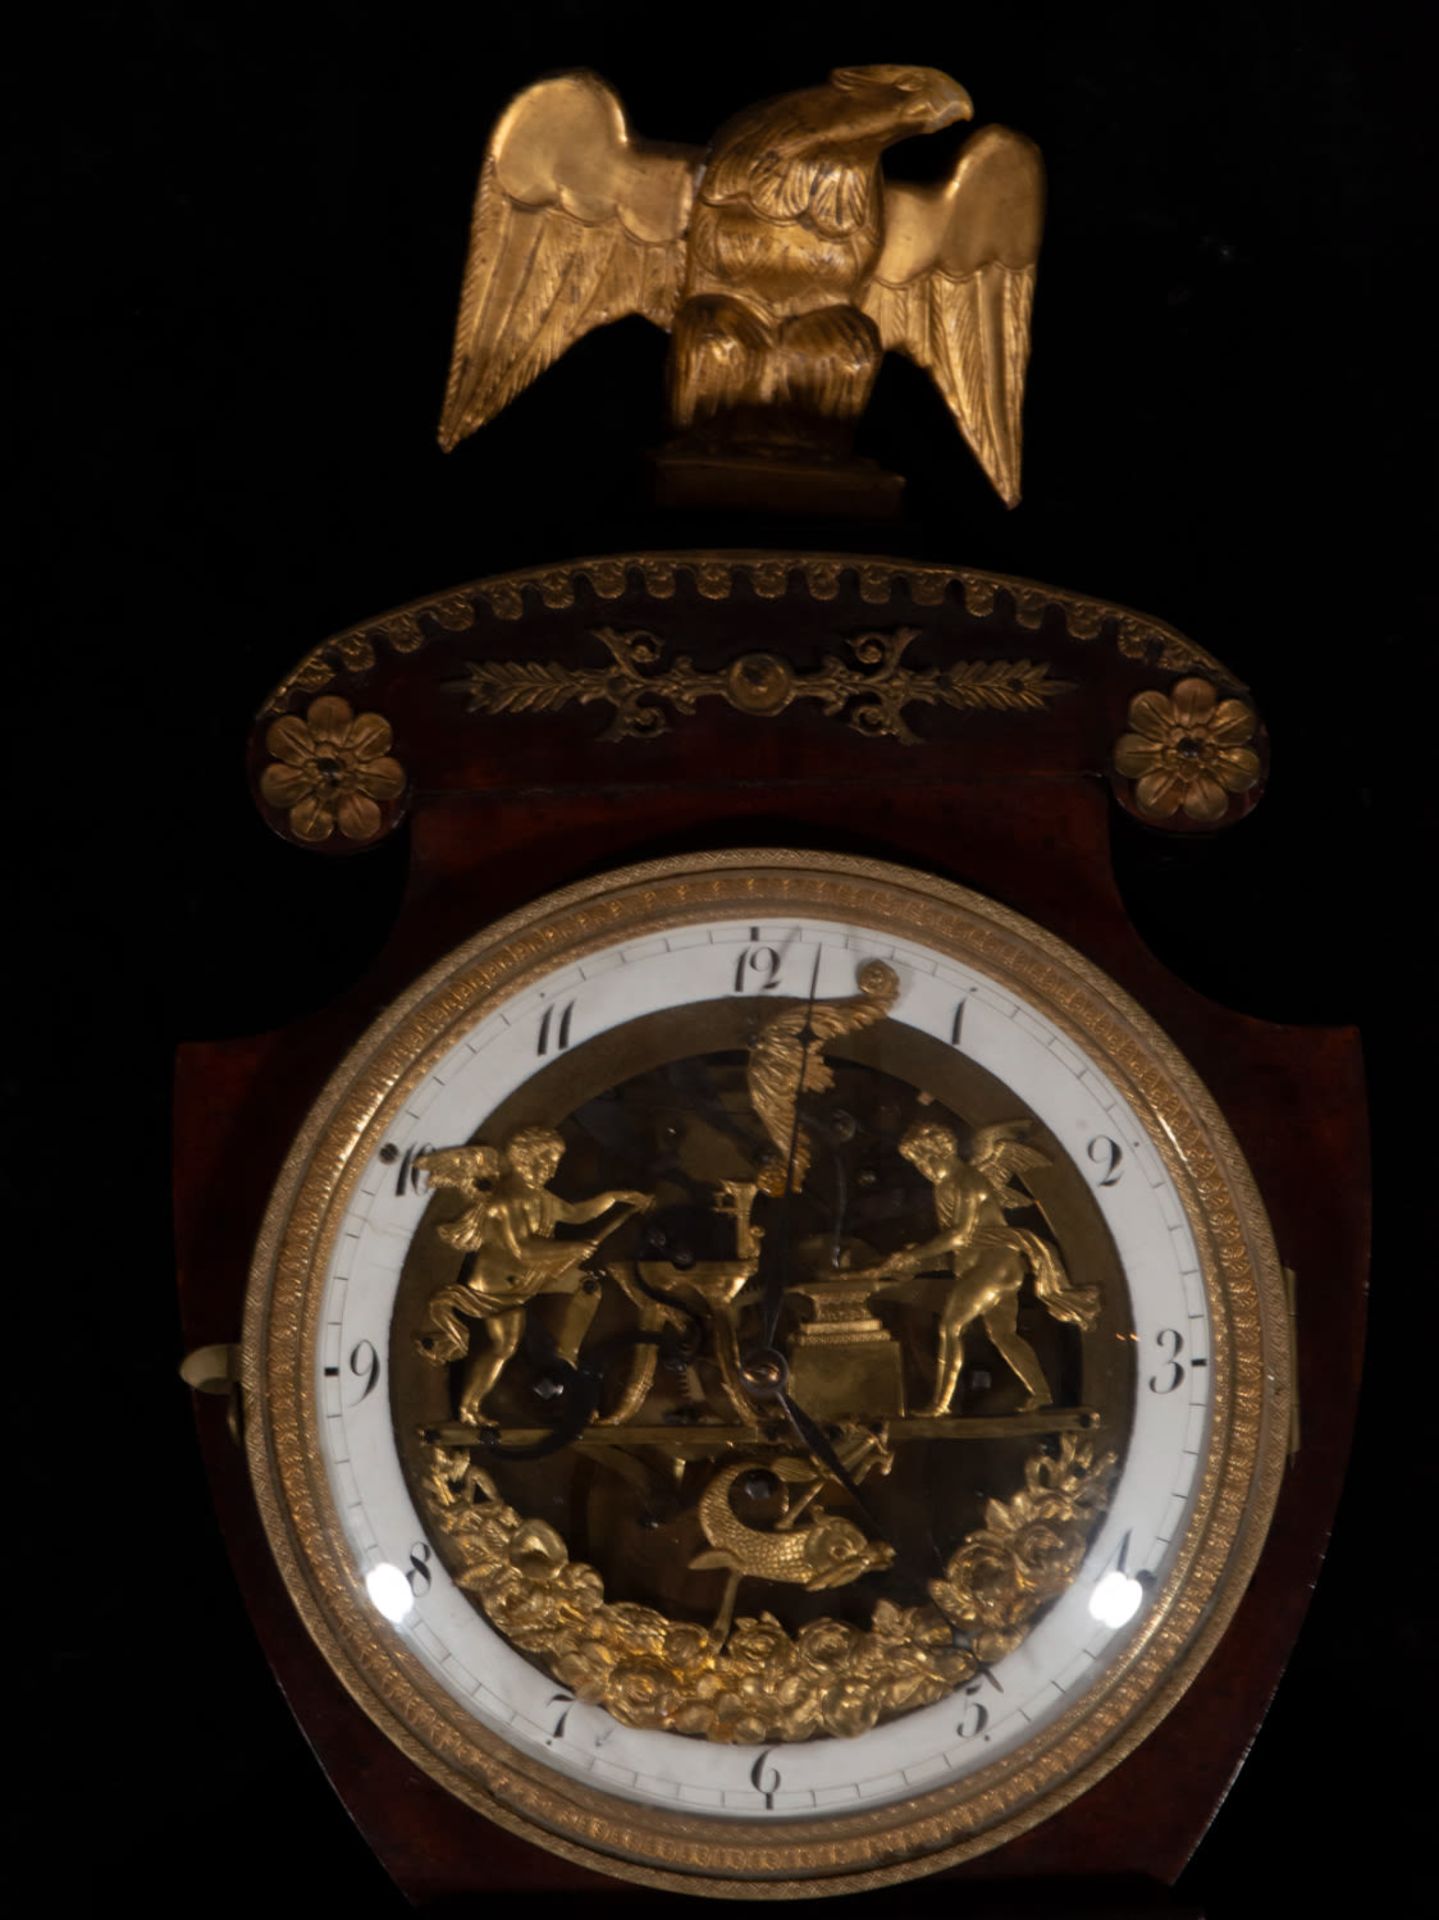 Large and Exquisite Bilderrahmen Table Clock with Automata from the late 19th century, Austria - Image 7 of 15